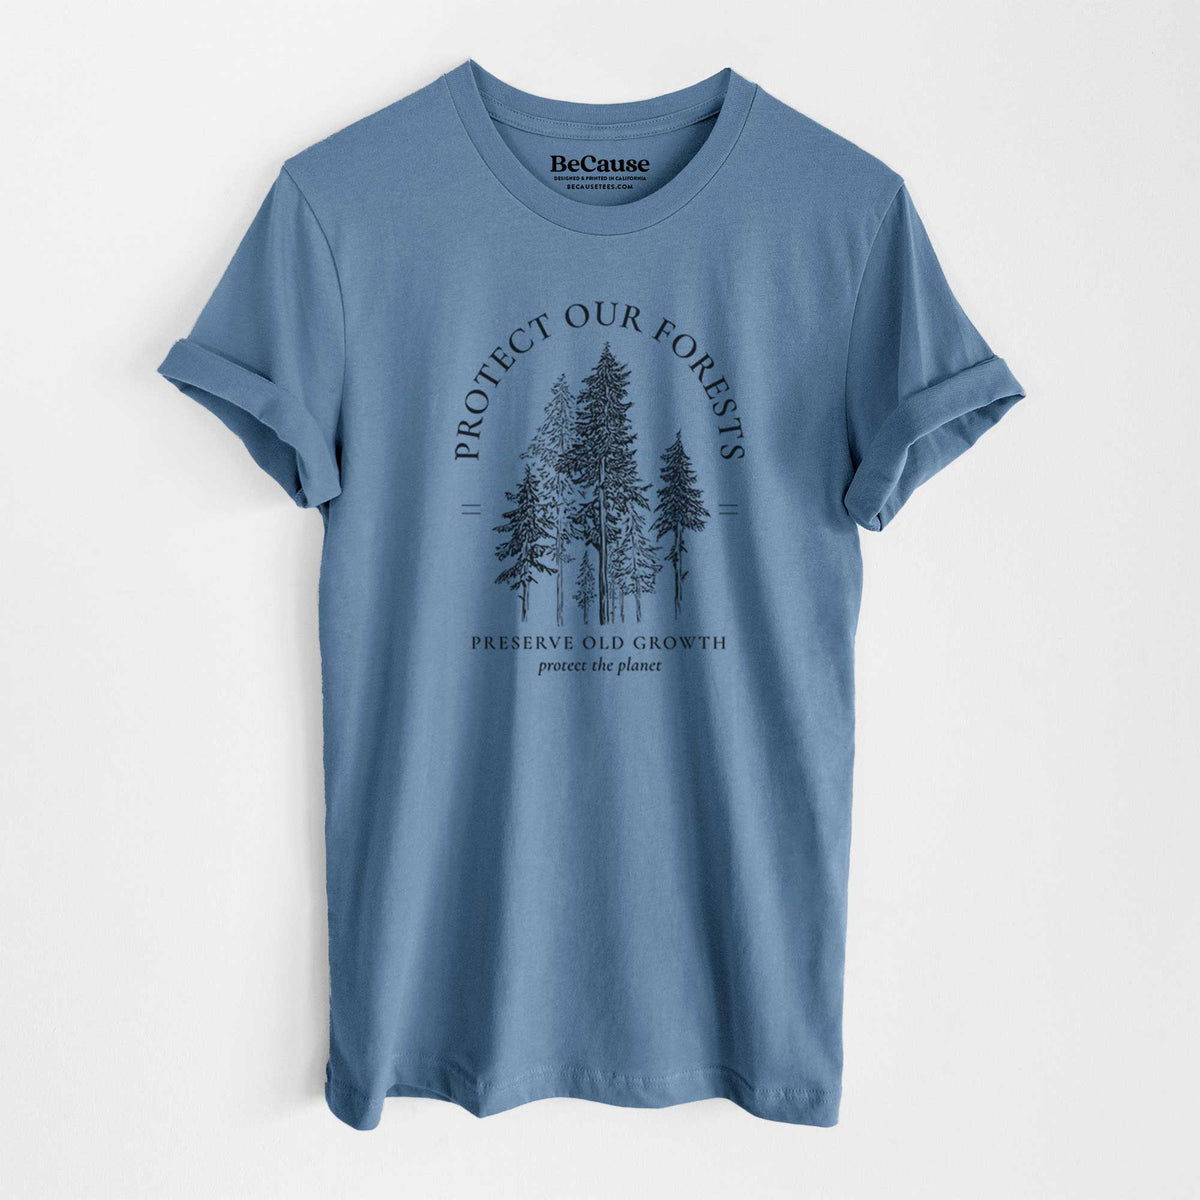 Protect our Forests - Preserve Old Growth - Lightweight 100% Cotton Unisex Crewneck